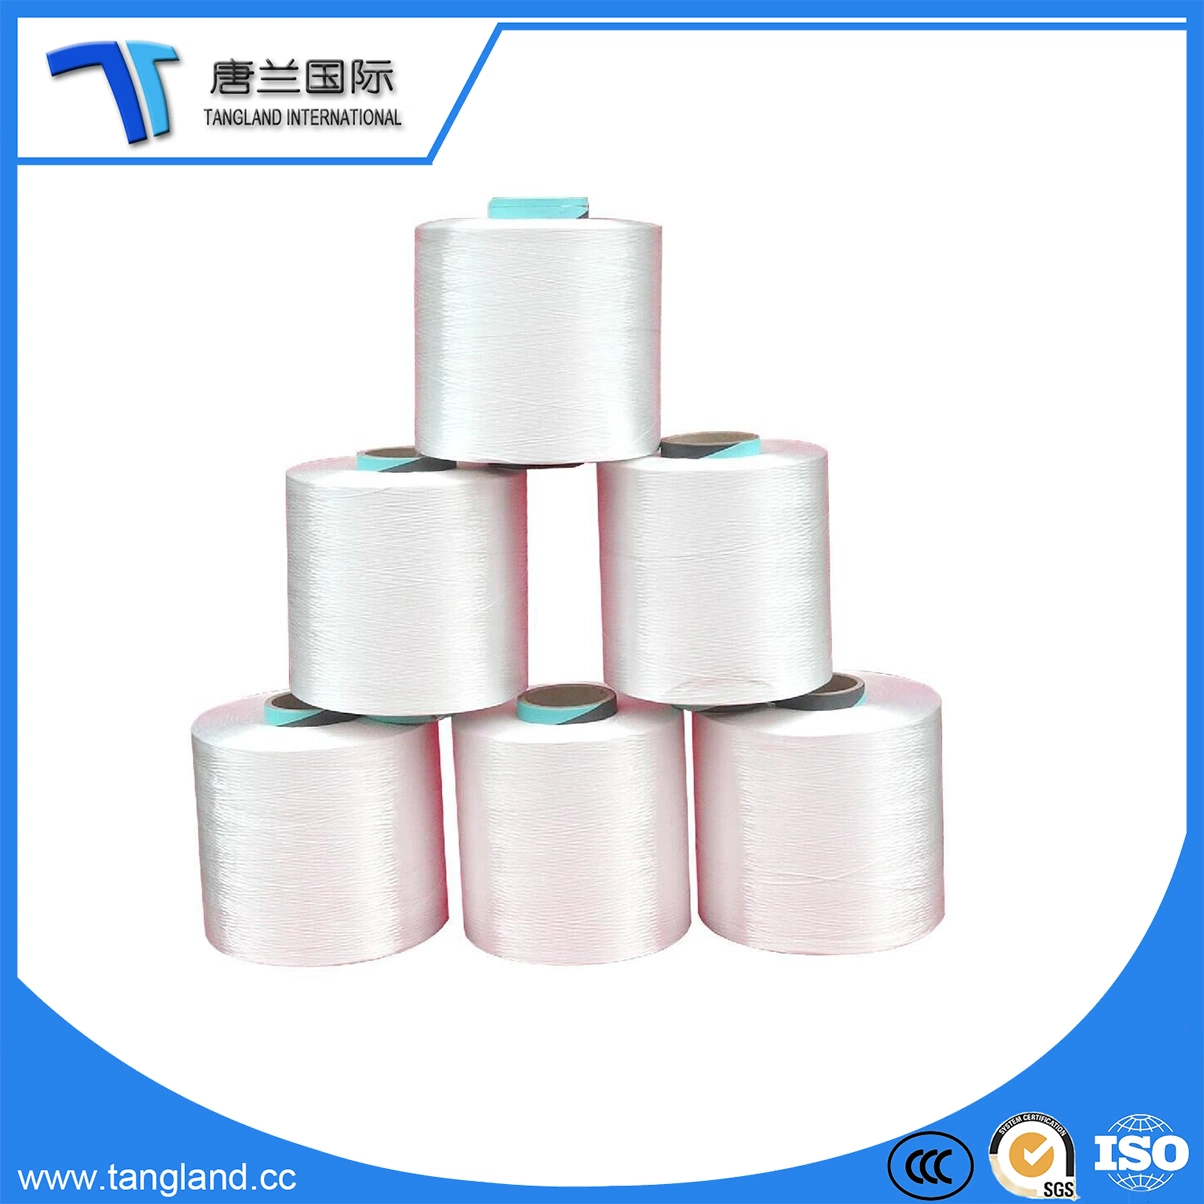 Nylon 6 Industrial Yarn Natural White for Sale in China